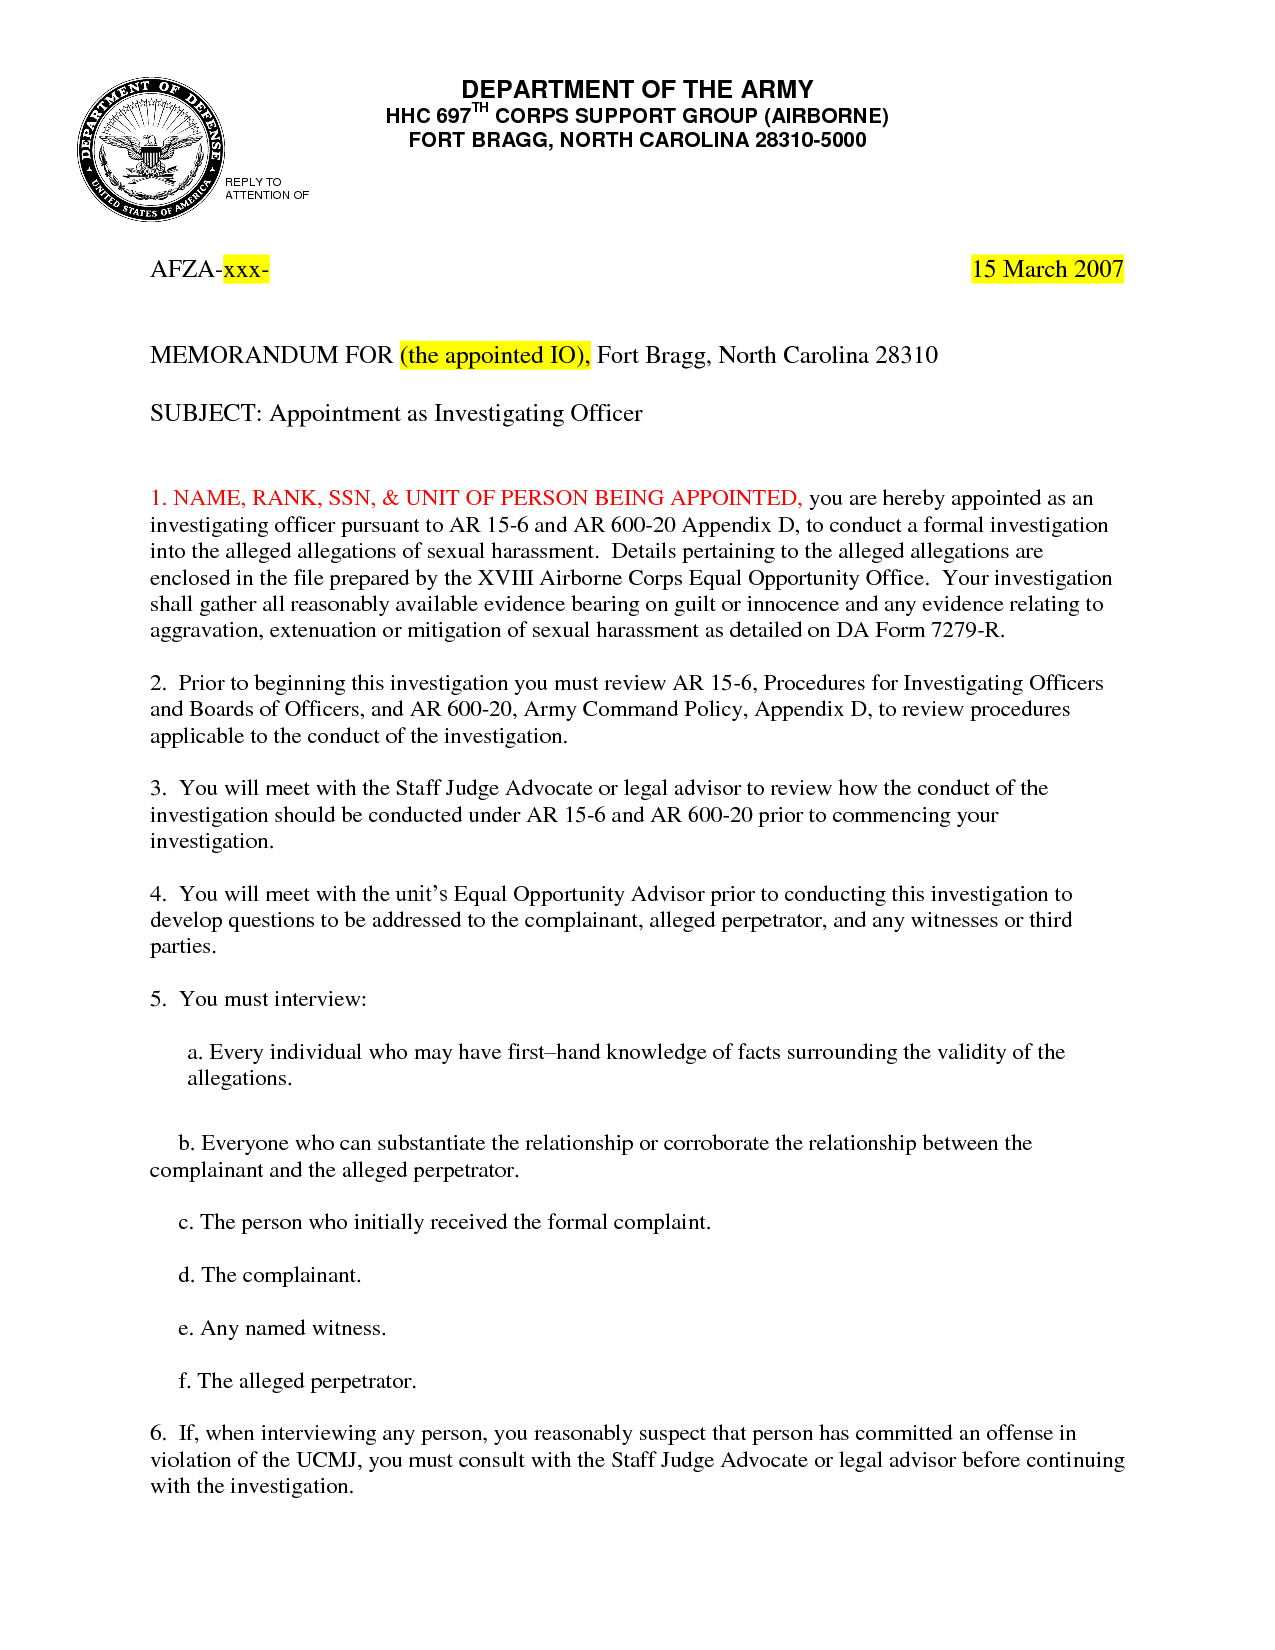 Army Memo Example Template | Free Cover Letter Templates Intended For Army Memorandum Template Word